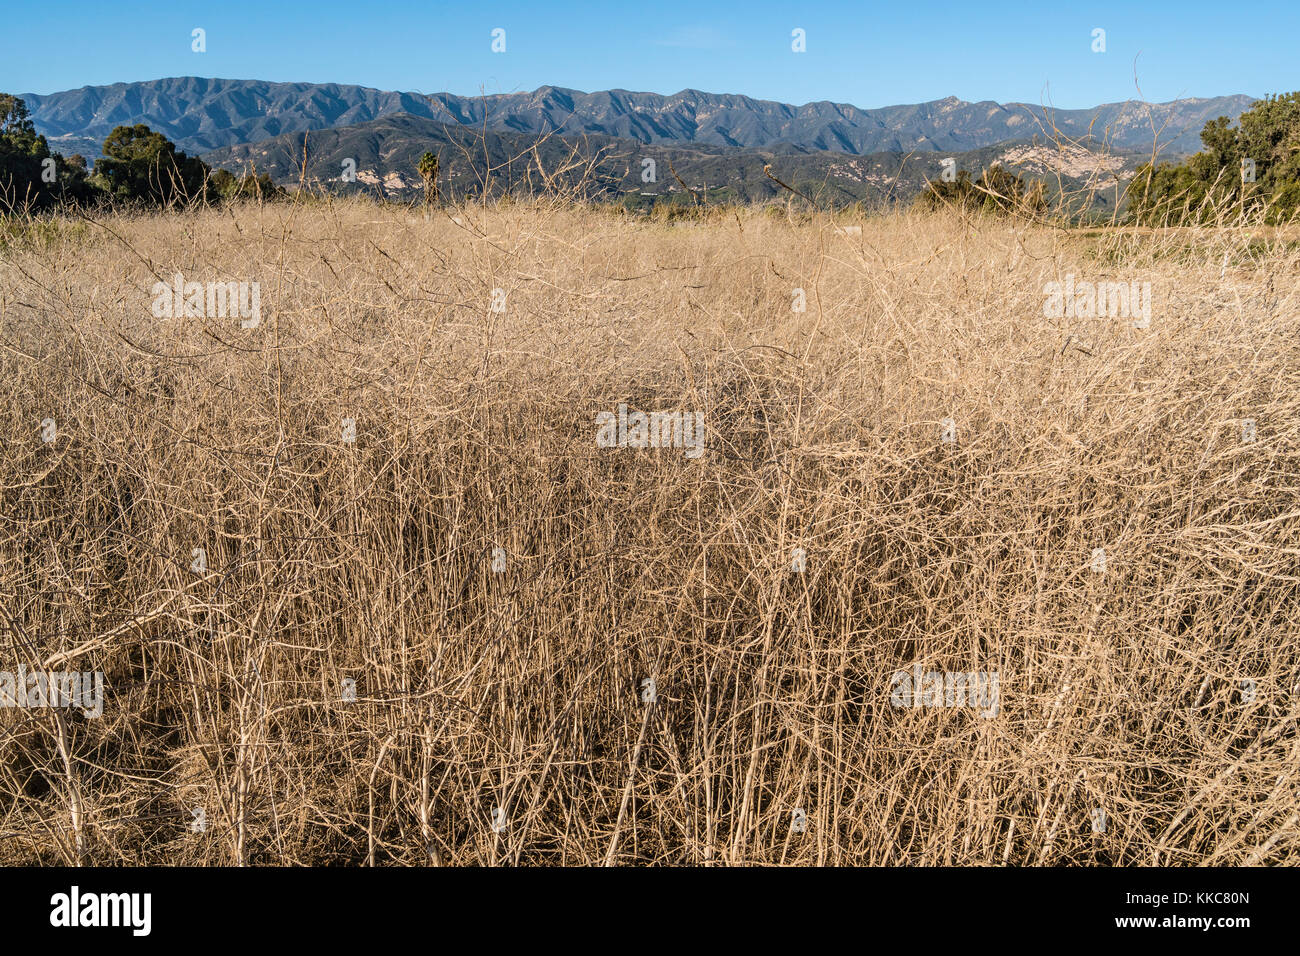 A field full of dried up fennel plants near the Pacific Ocean in Carpinteria, California Stock Photo